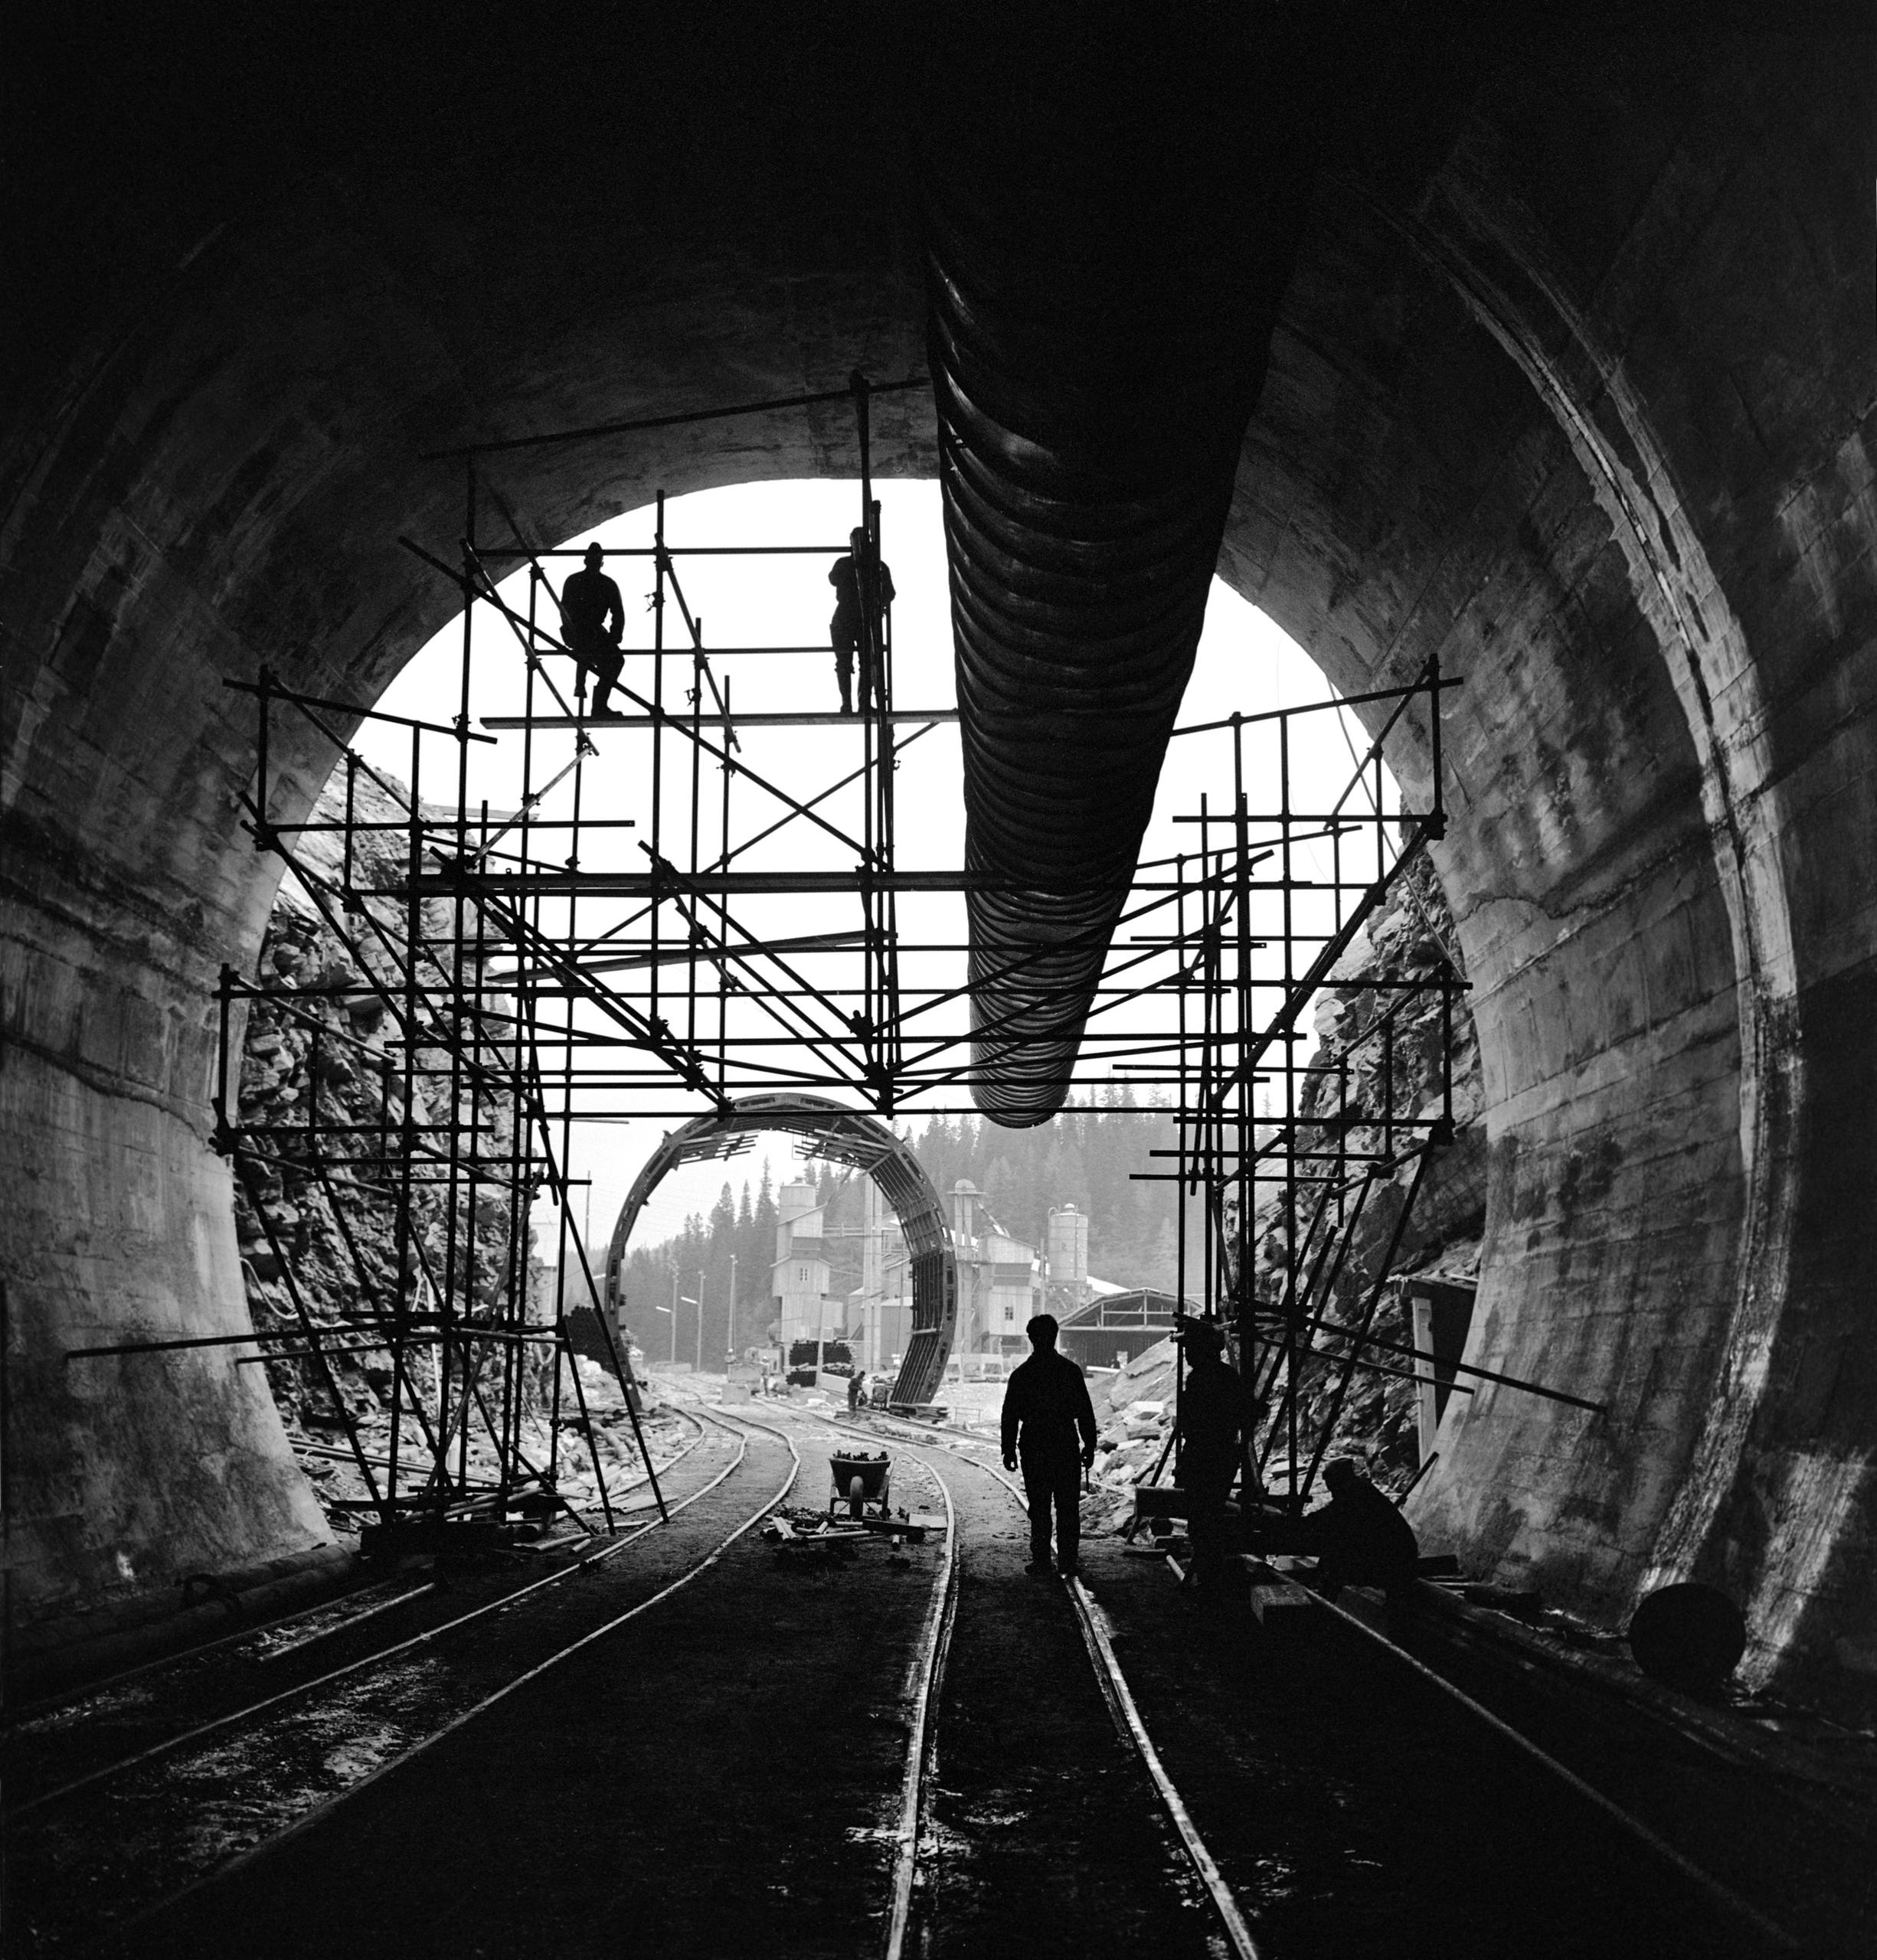 Construction workers in the San Bernardino road tunnel.